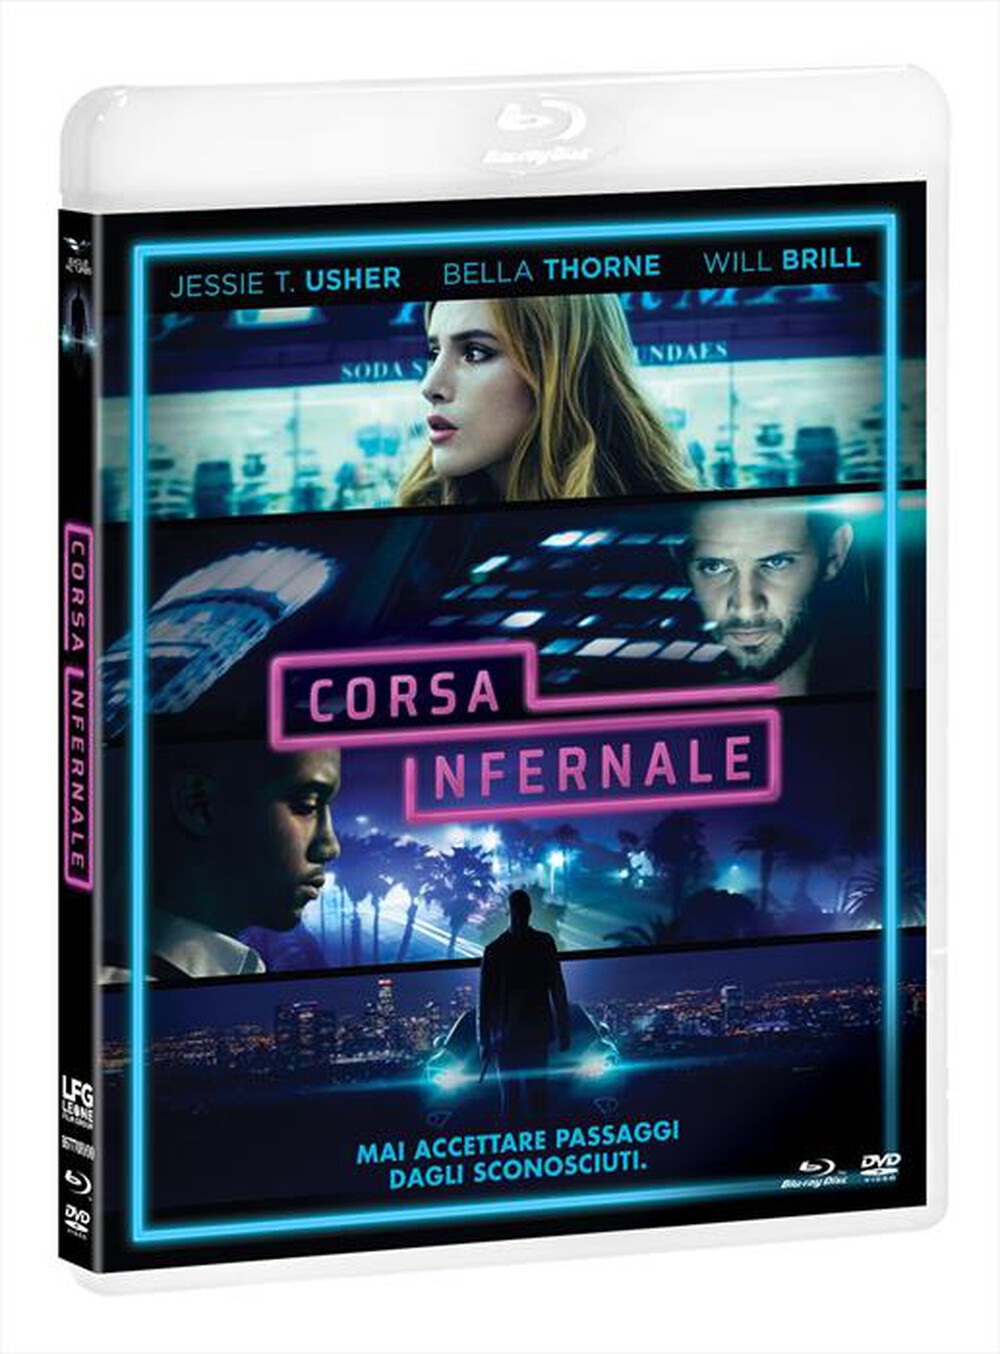 "EAGLE PICTURES - Corsa Infernale (Blu-Ray+Dvd)"